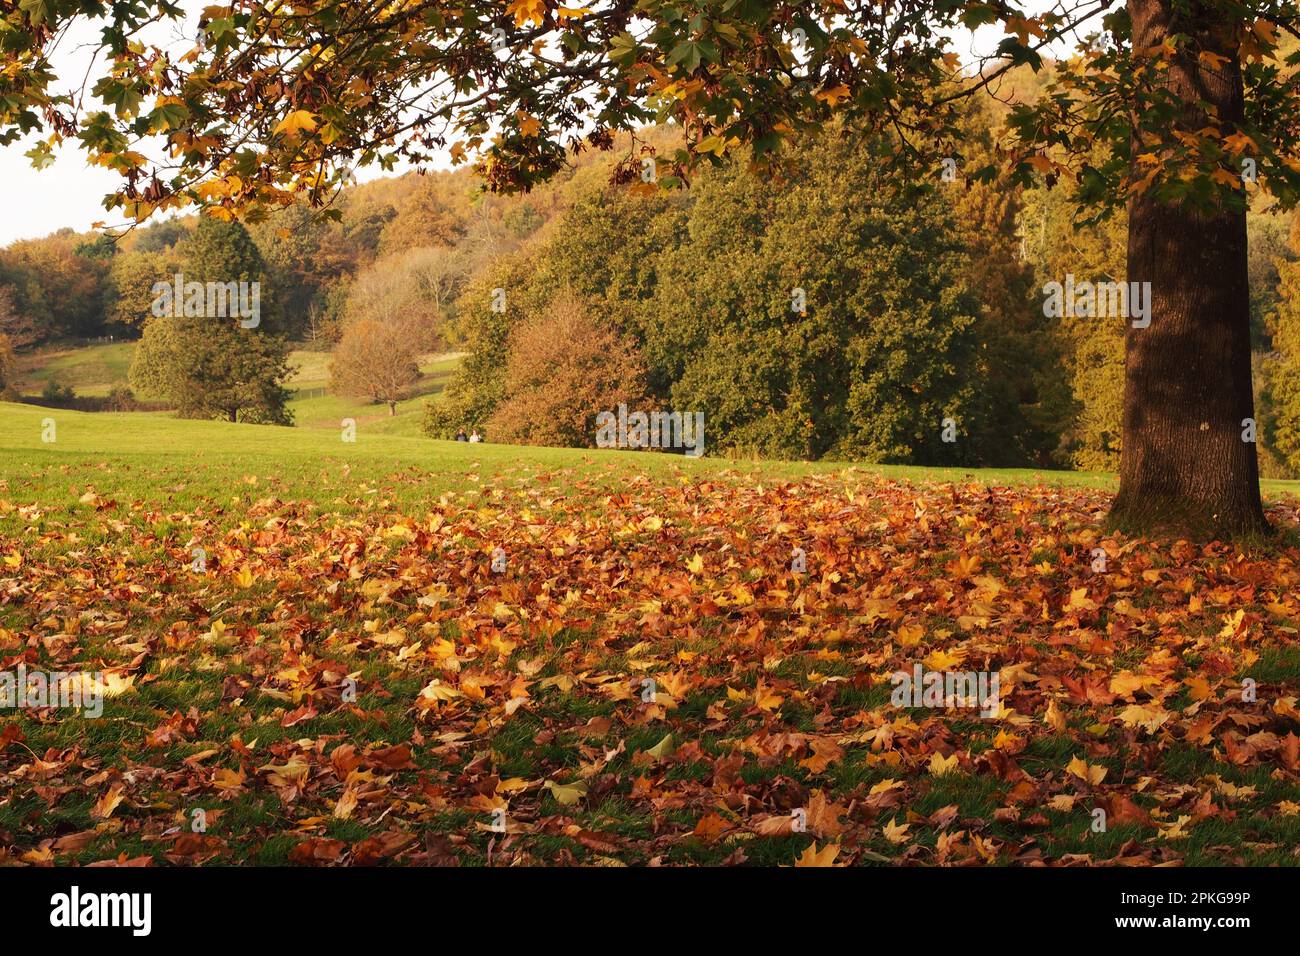 A low down autumn shot looking across an autumn garden lawn with fallen leaves on grass and a autumn coloured trees in the background Stock Photo